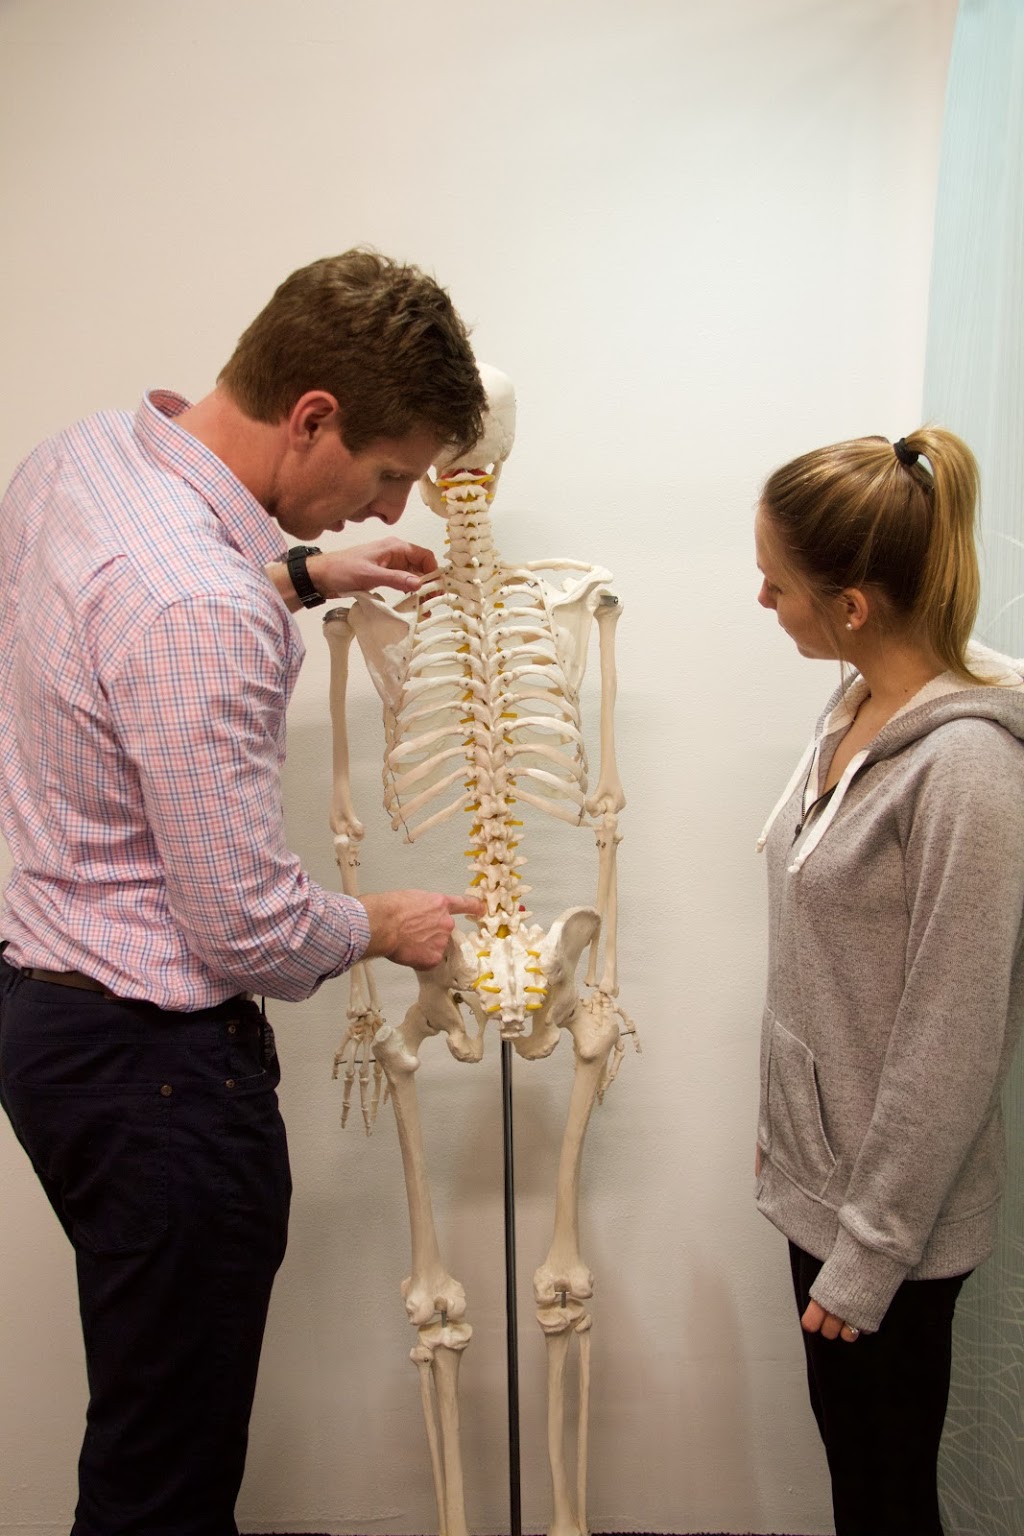 Clinical Physio | health | 5/351 Mona Vale Rd, St. Ives NSW 2075, Australia | 0283193642 OR +61 2 8319 3642